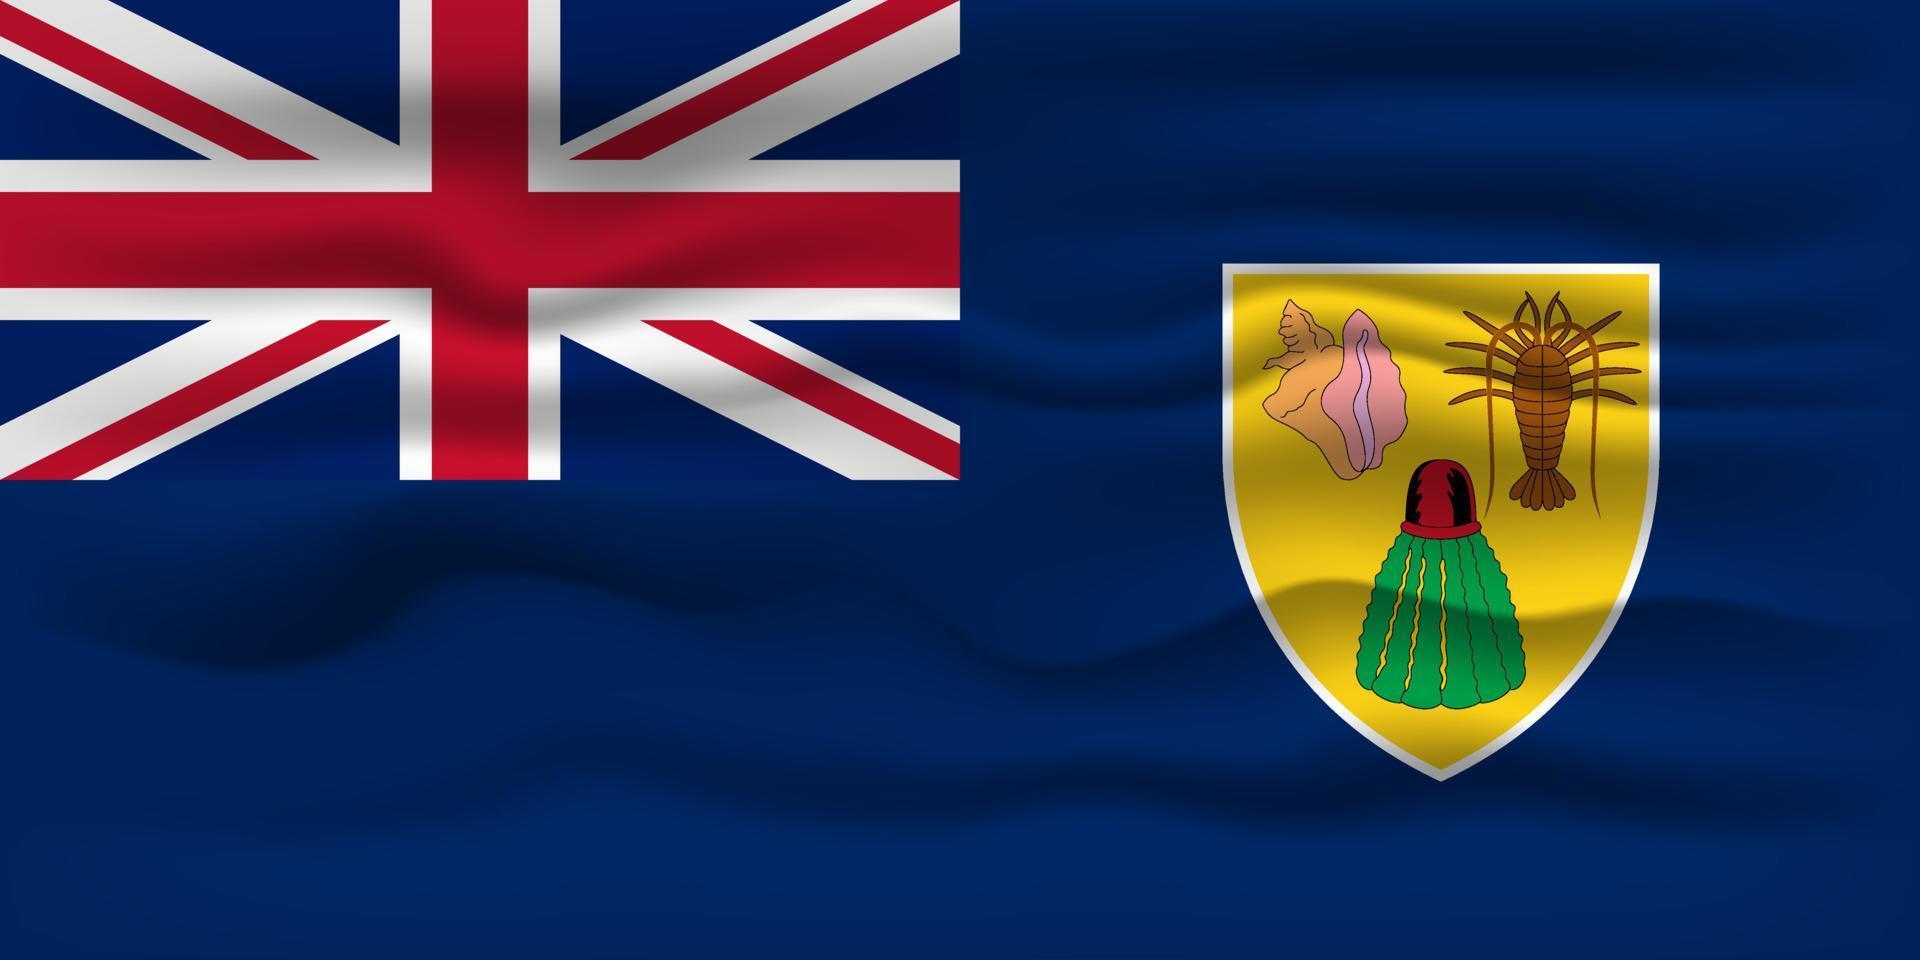 Waving flag of the country Turks and Caicos Islands. Vector illustration.